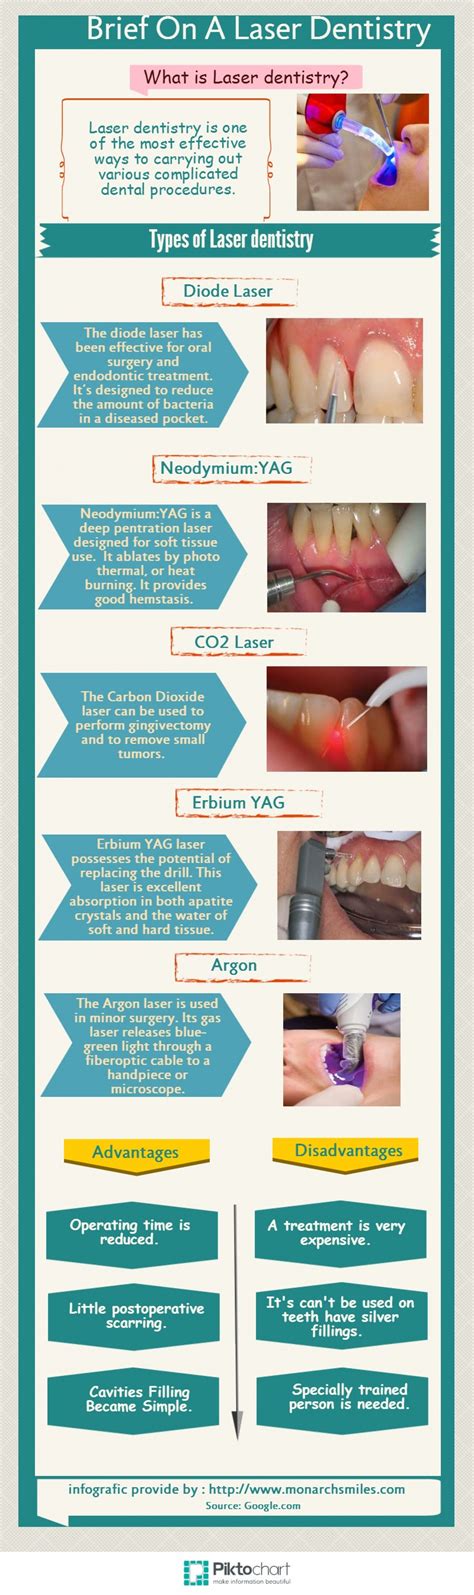 Brief On A Laser Dentistry Infographic Visual Ly Laser Dentistry